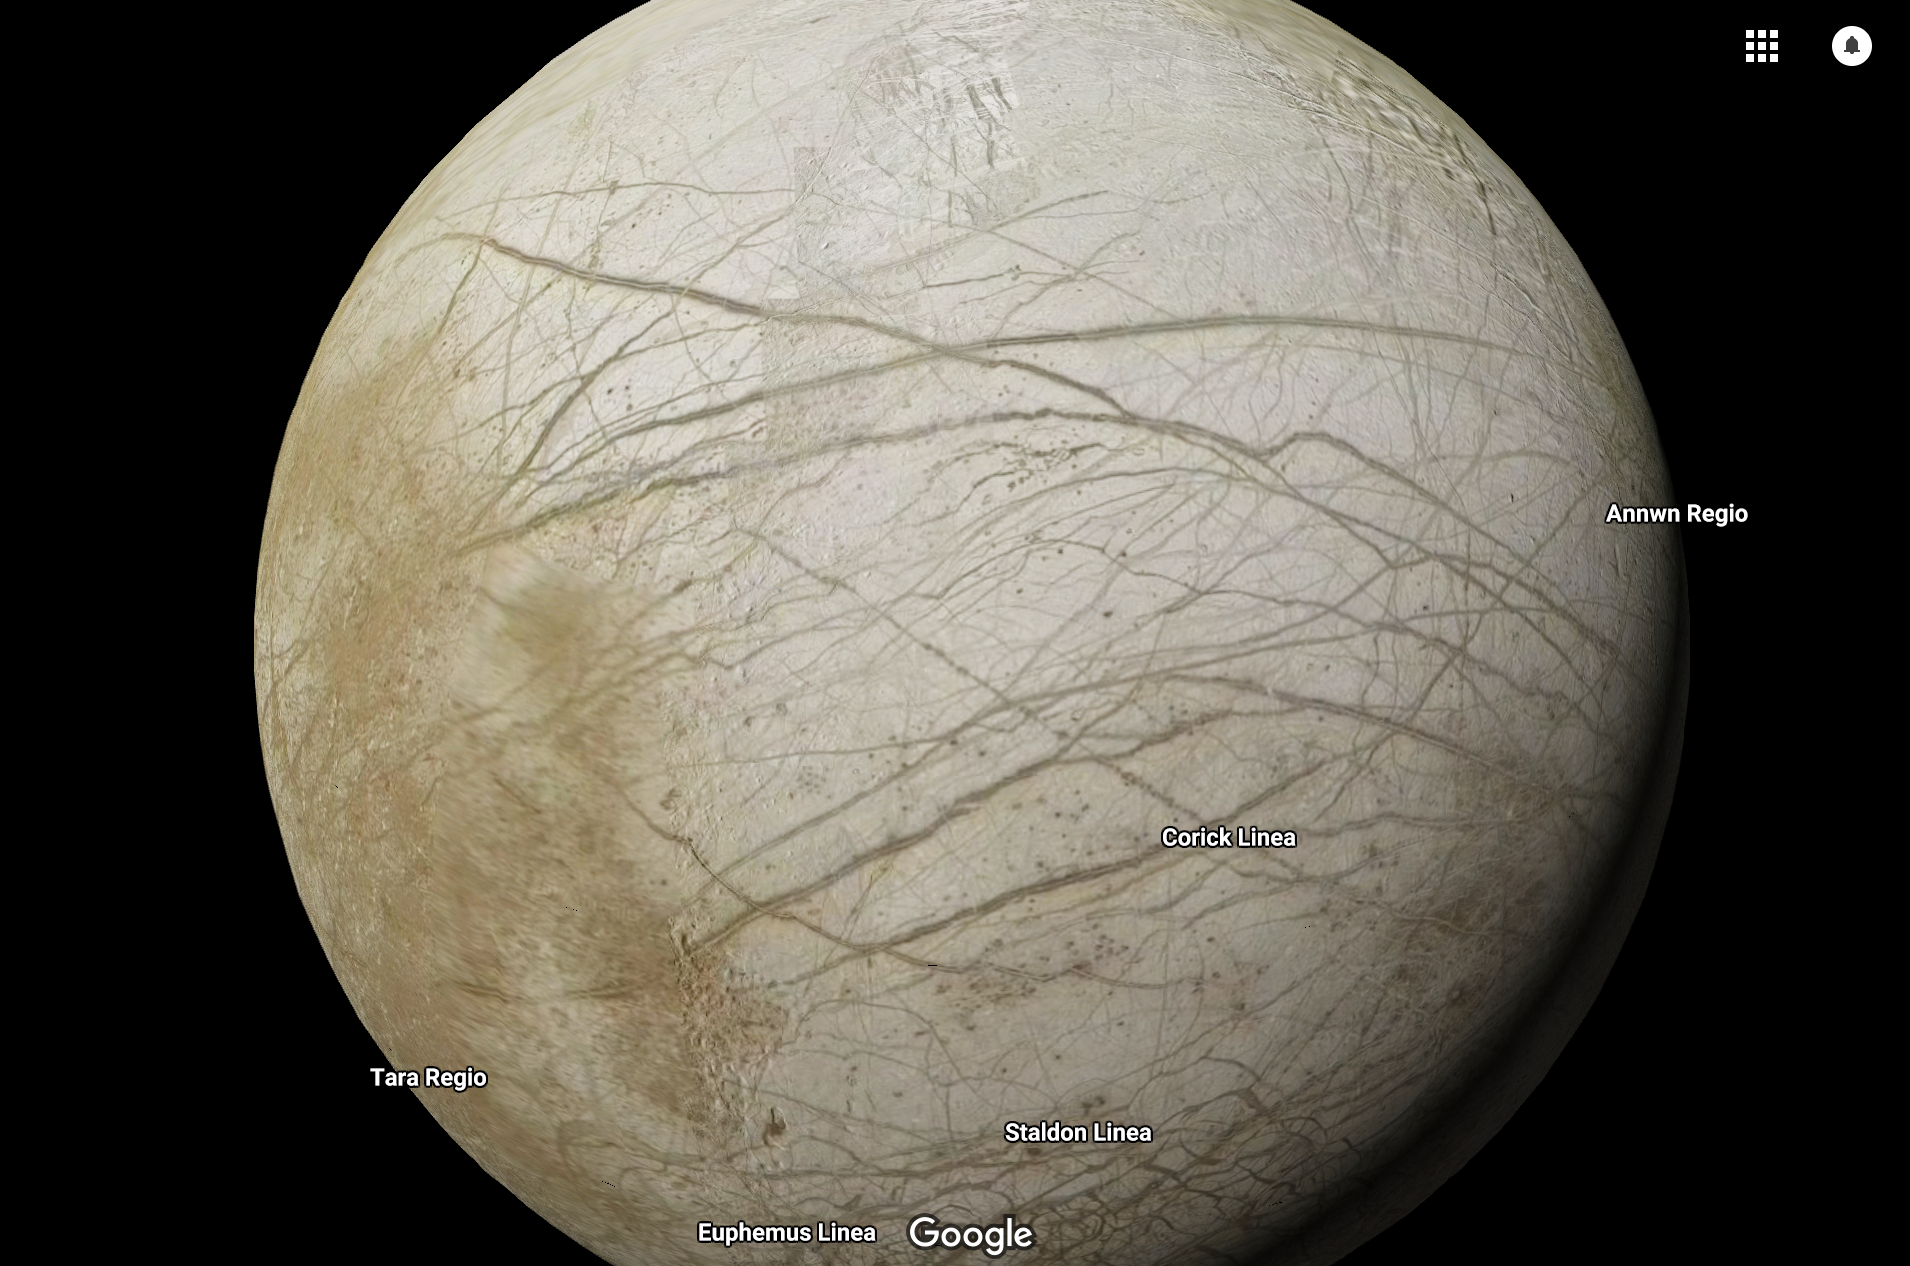 Escape This Wretched Earth For An Hour With Google’s Sweet New Solar System Maps